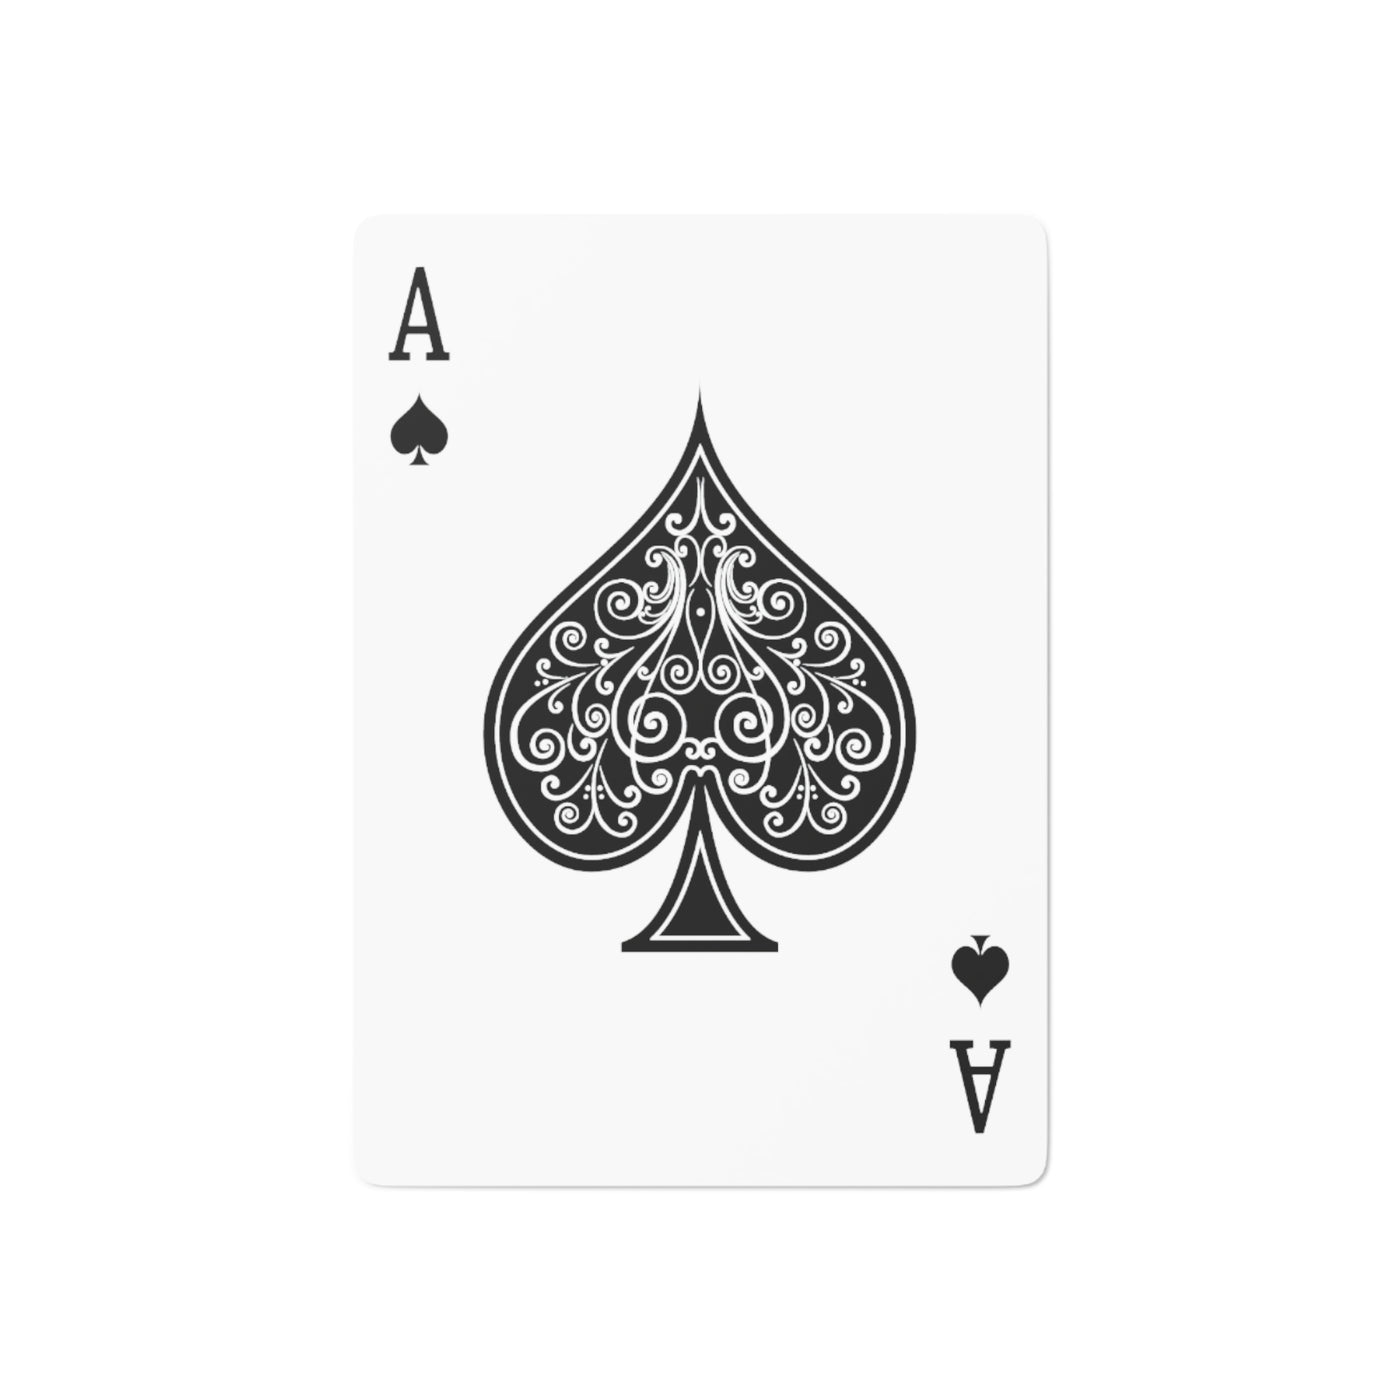 Custom Poker Cards - Personalized deck of playing cards designed for poker games or card playing, featuring customized designs or images